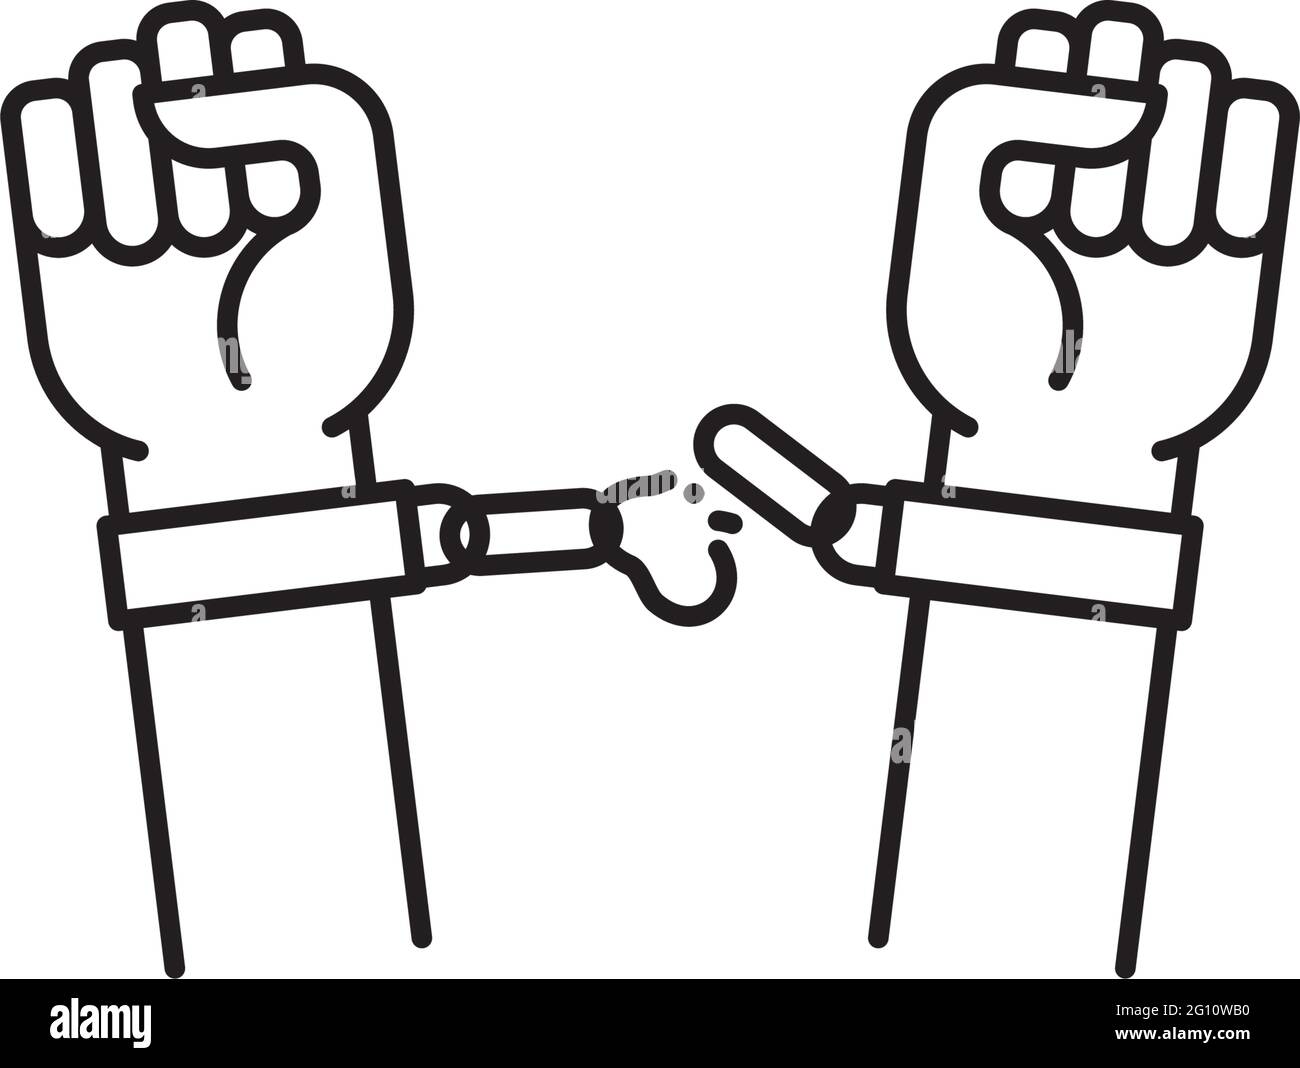 Hands freeing themselves from shackles vector line icon for International Day for the Abolition of Slavery on December 2 Stock Vector